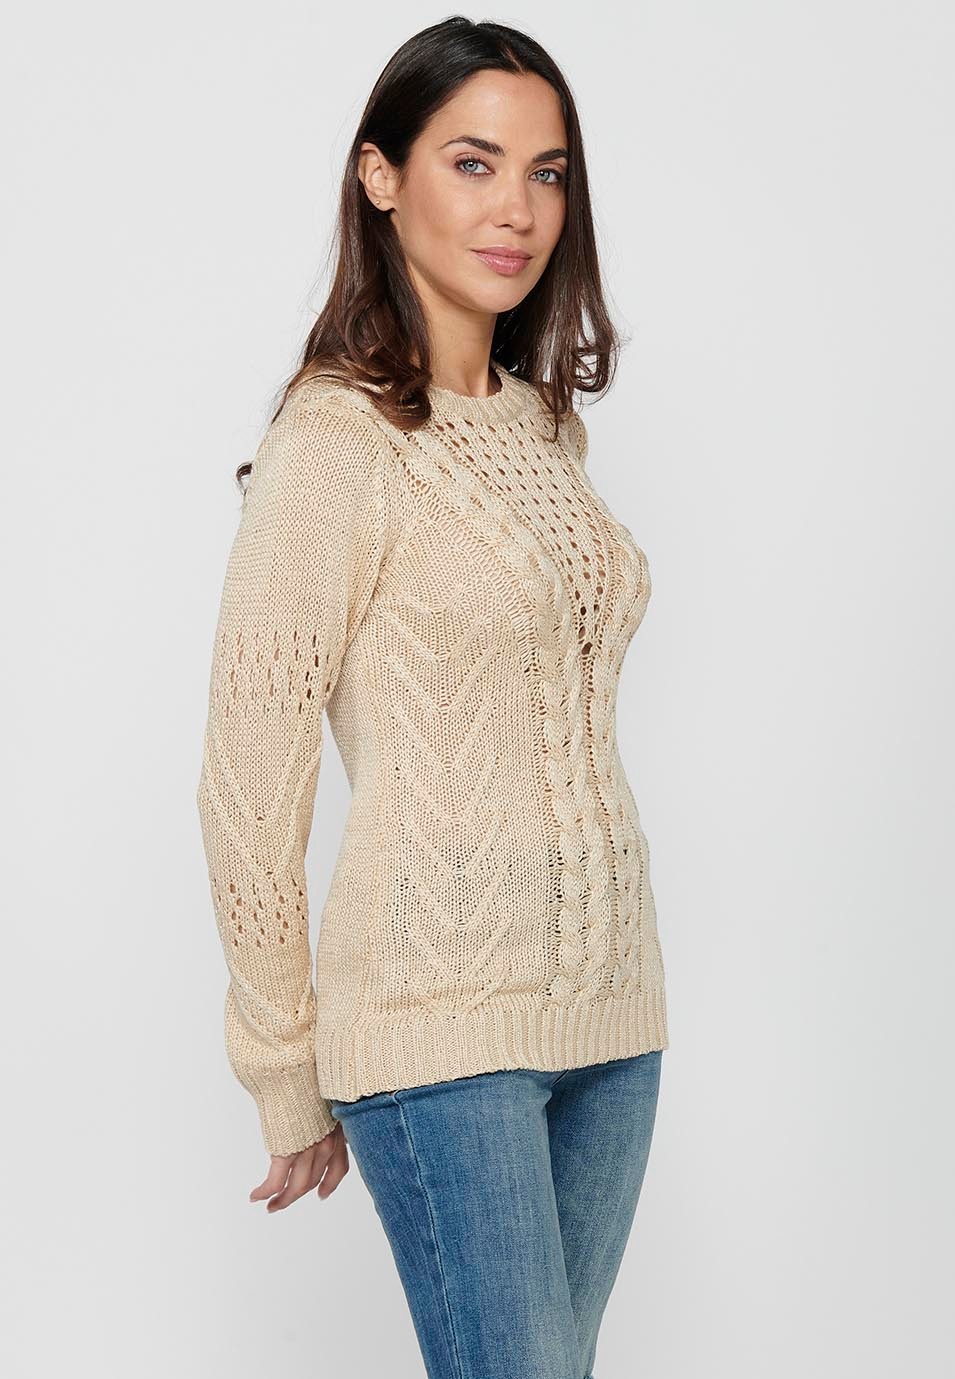 Long sleeve sweater with round neck. Beige Openwork Front Tricot for Women 1